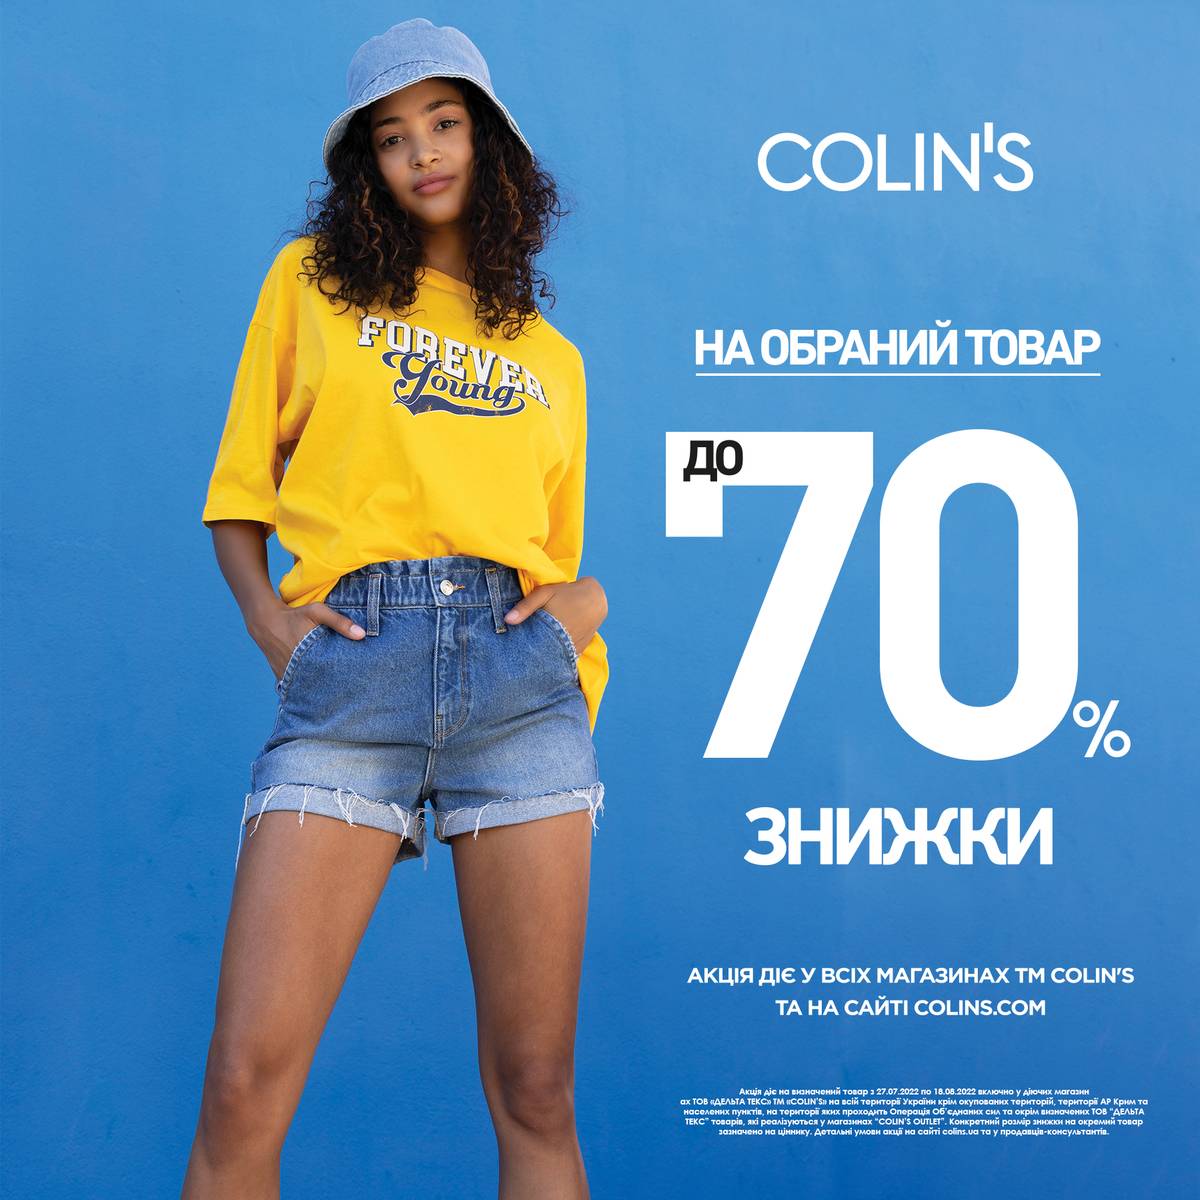 Discounts up to 70% at COLIN'S